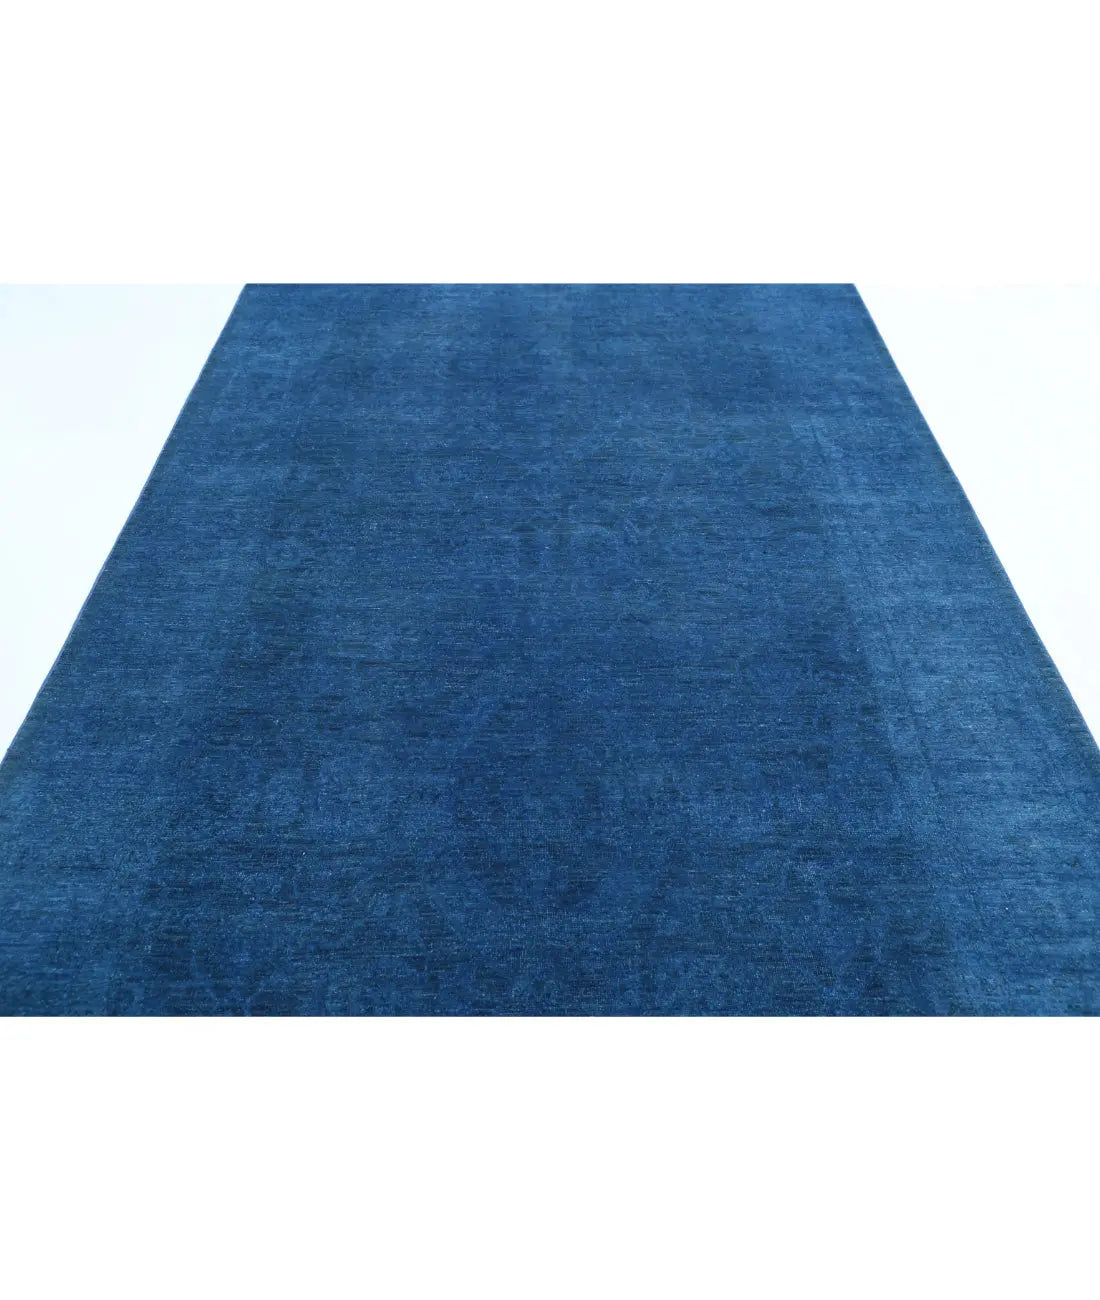 Hand Knotted Overdye Wool Rug - 5'11'' x 9'9''